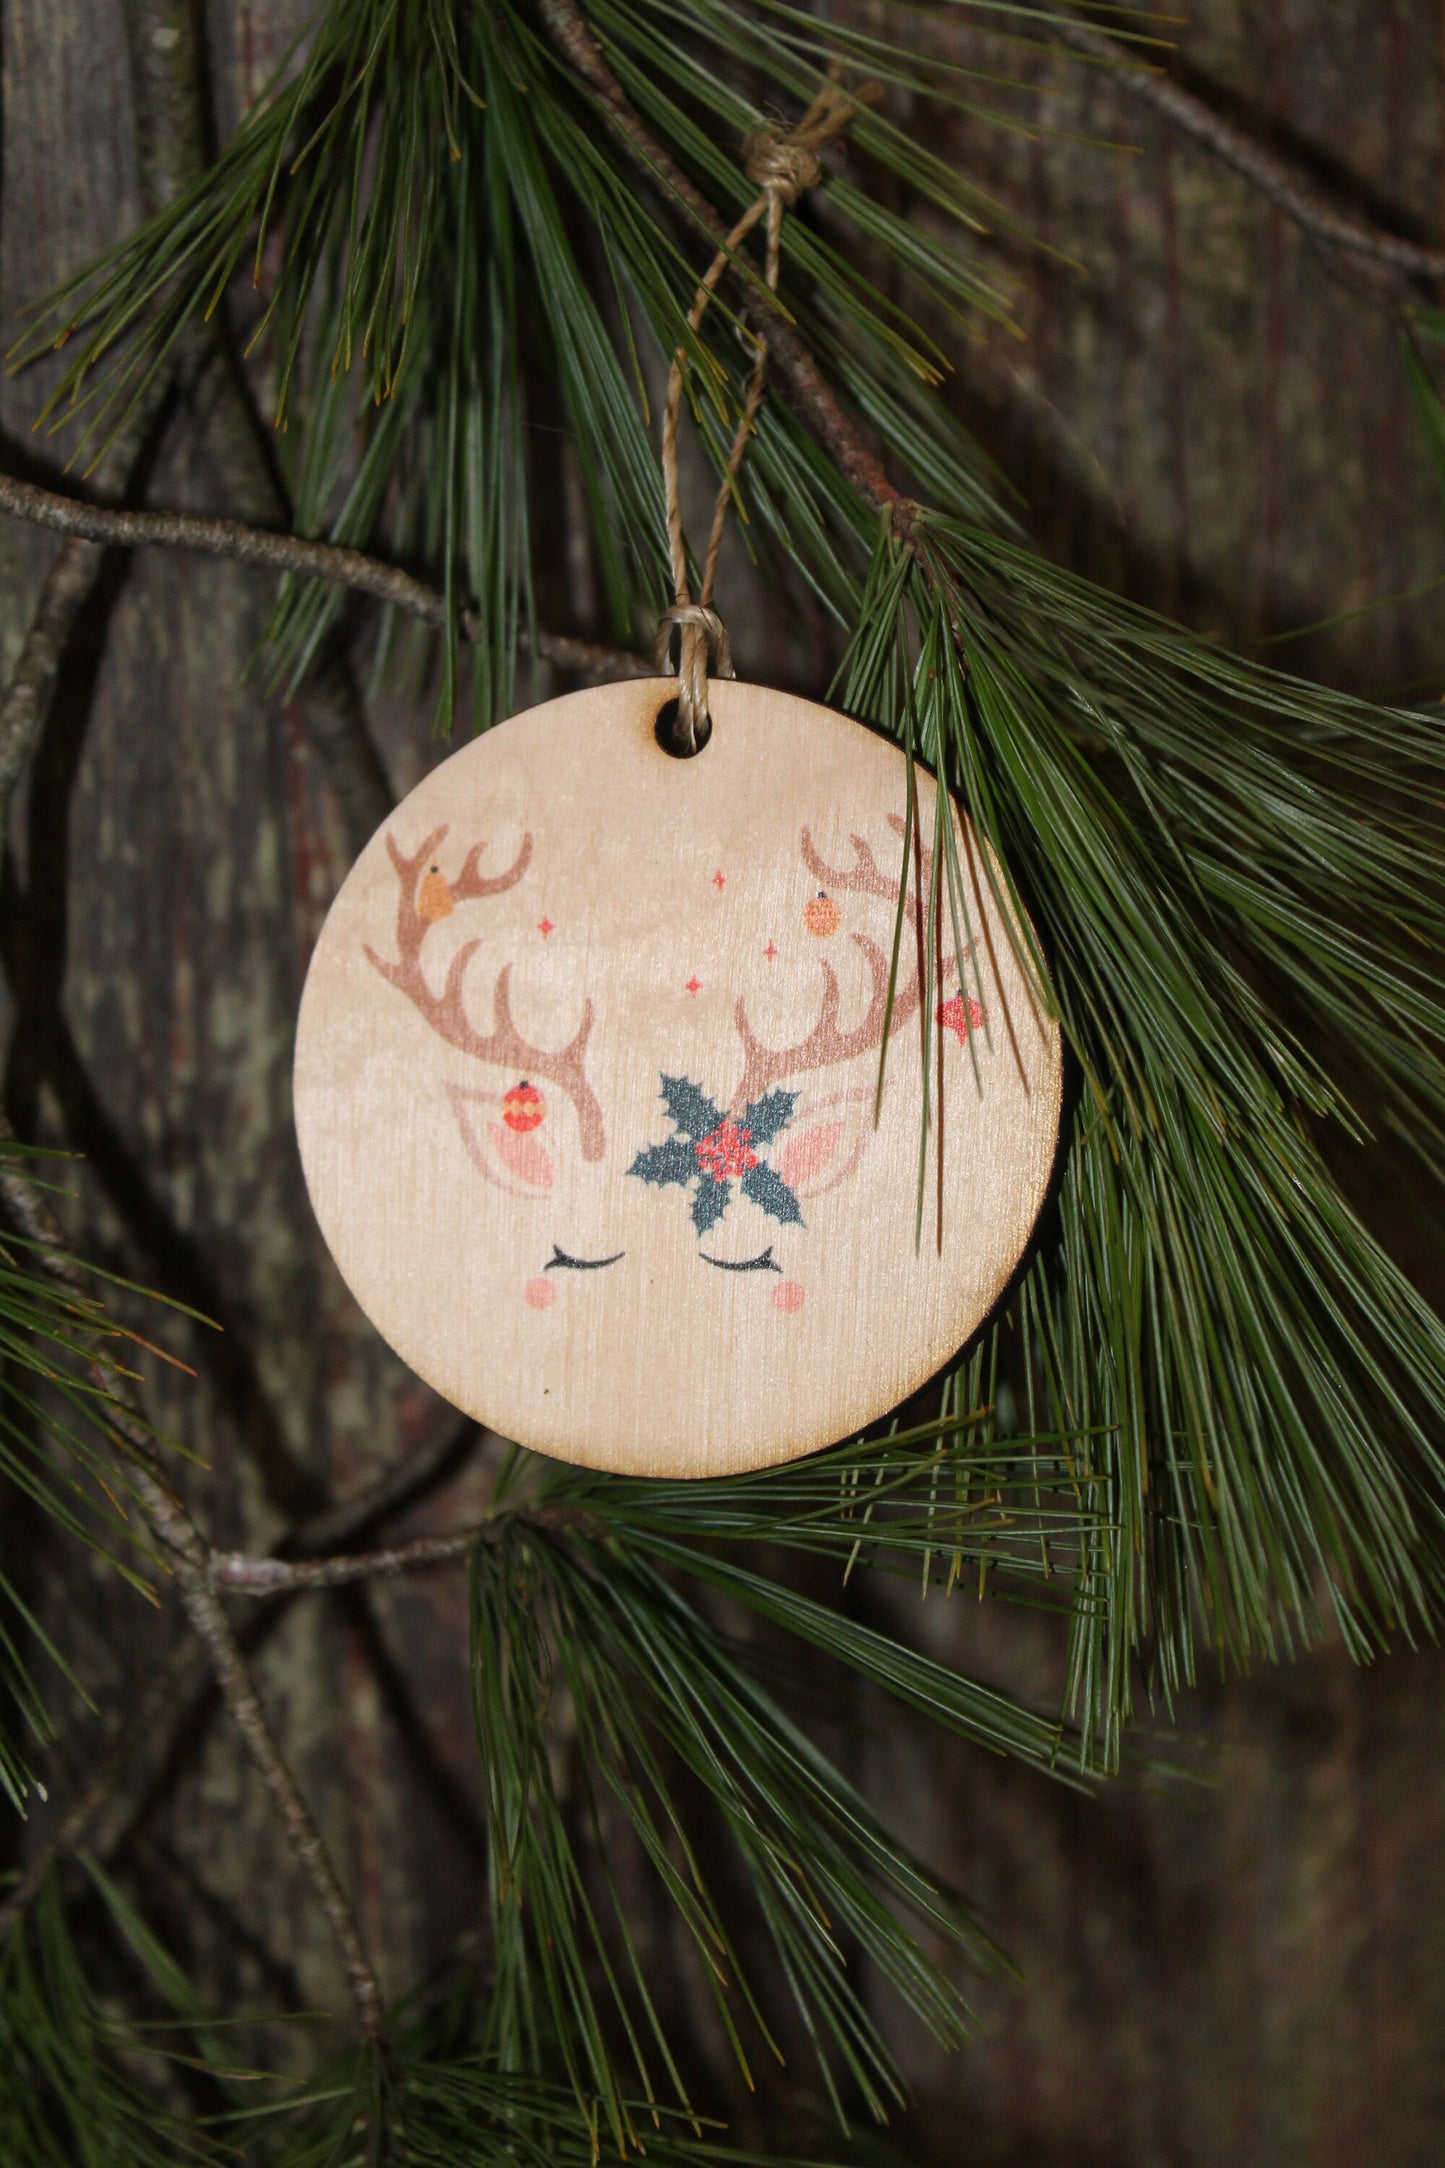 Unicorn Face Ornament Reindeer Antlers Wood Slice Poinsettia Horn Eyelashes Up-close Primitive Christmas Ornament Rustic Tree Printed